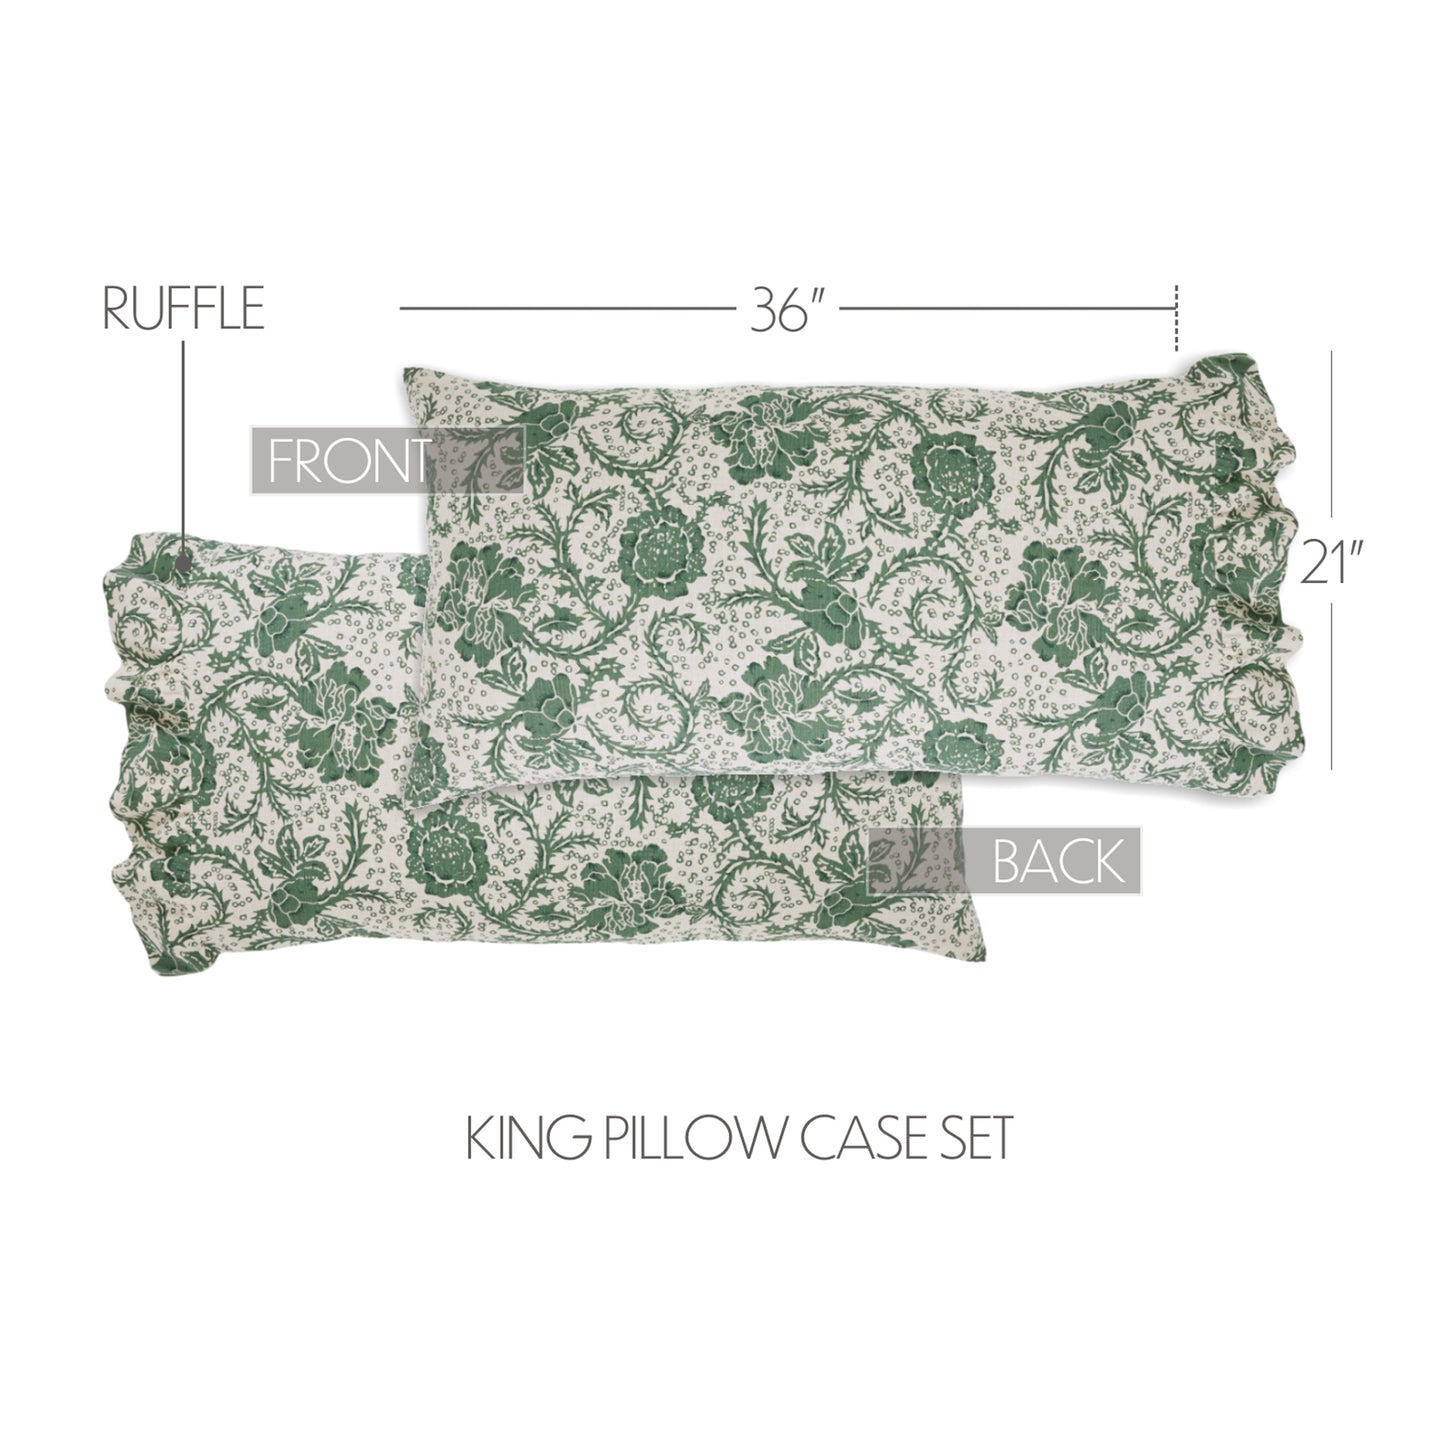 81220-Dorset-Green-Floral-Ruffled-King-Pillow-Case-Set-of-2-21x36-4-image-1